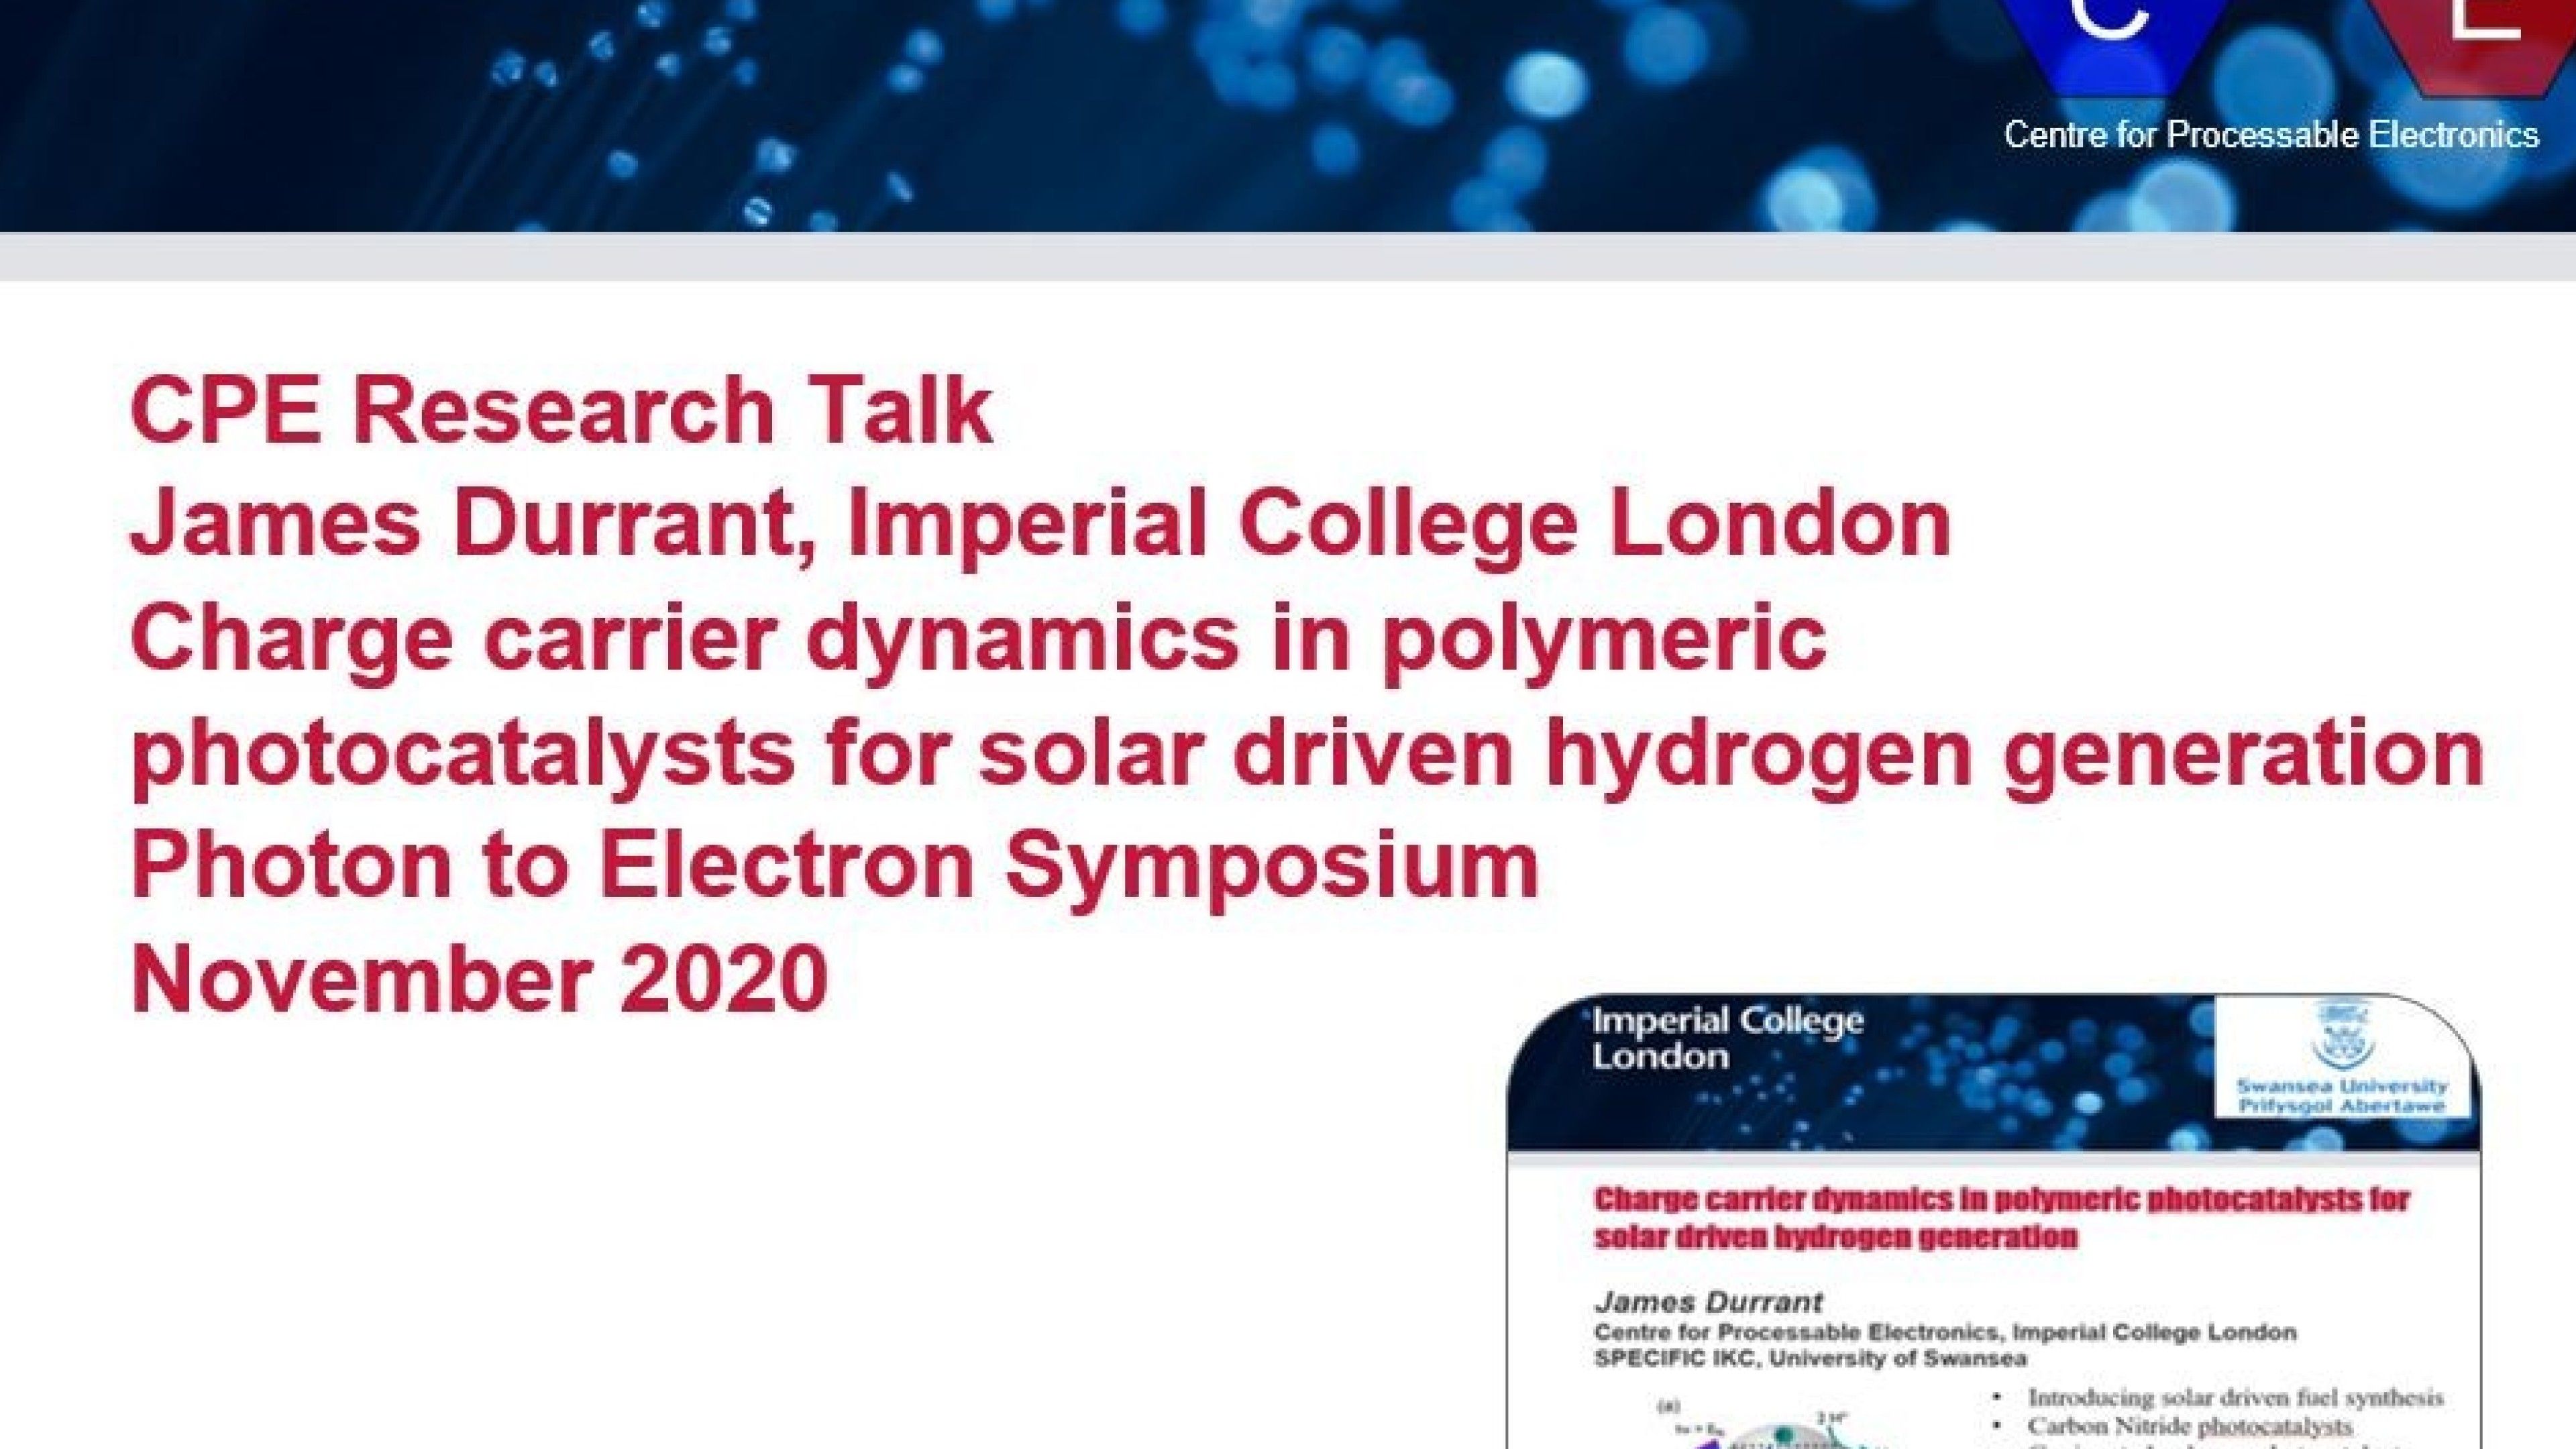 James Durrant Charge carrier dynamics in polymeric photocatalysts for solar driven hydrogen generation